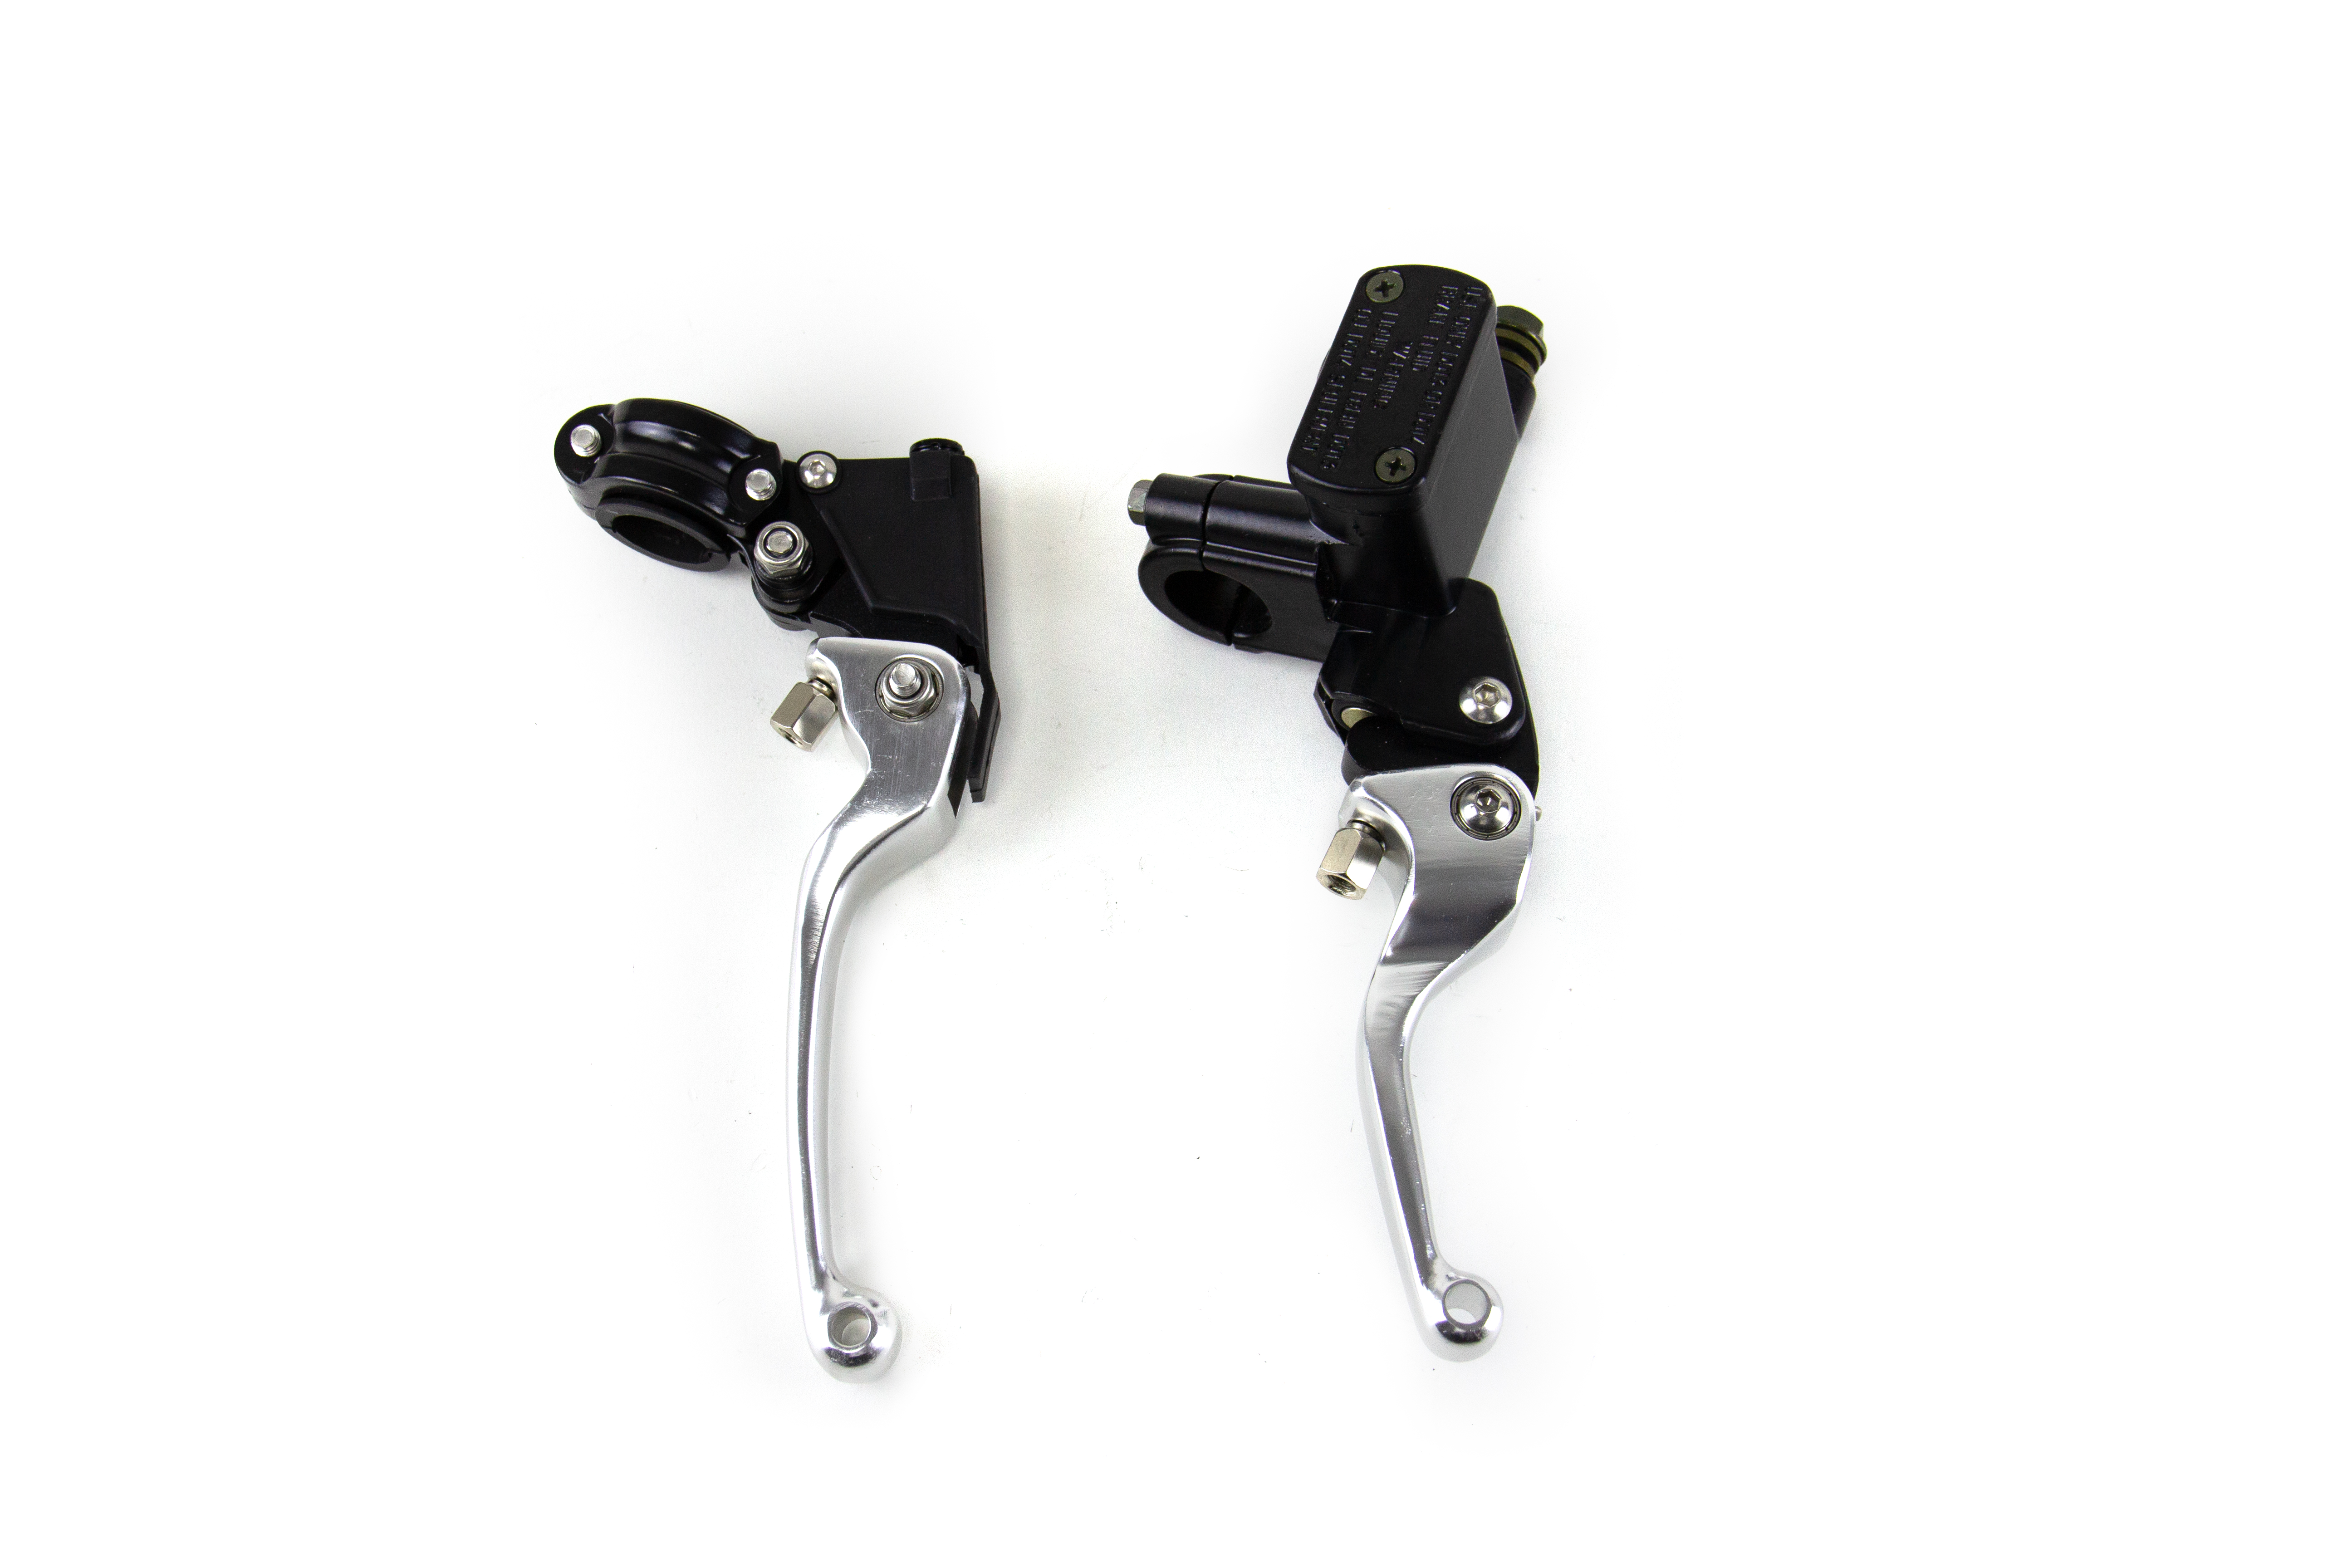 ASV CRF YZF XR CQR High Racing Motorcycle Parts Adjustable Folding Handle Clutch Lever Motorcycle Brakes With pump